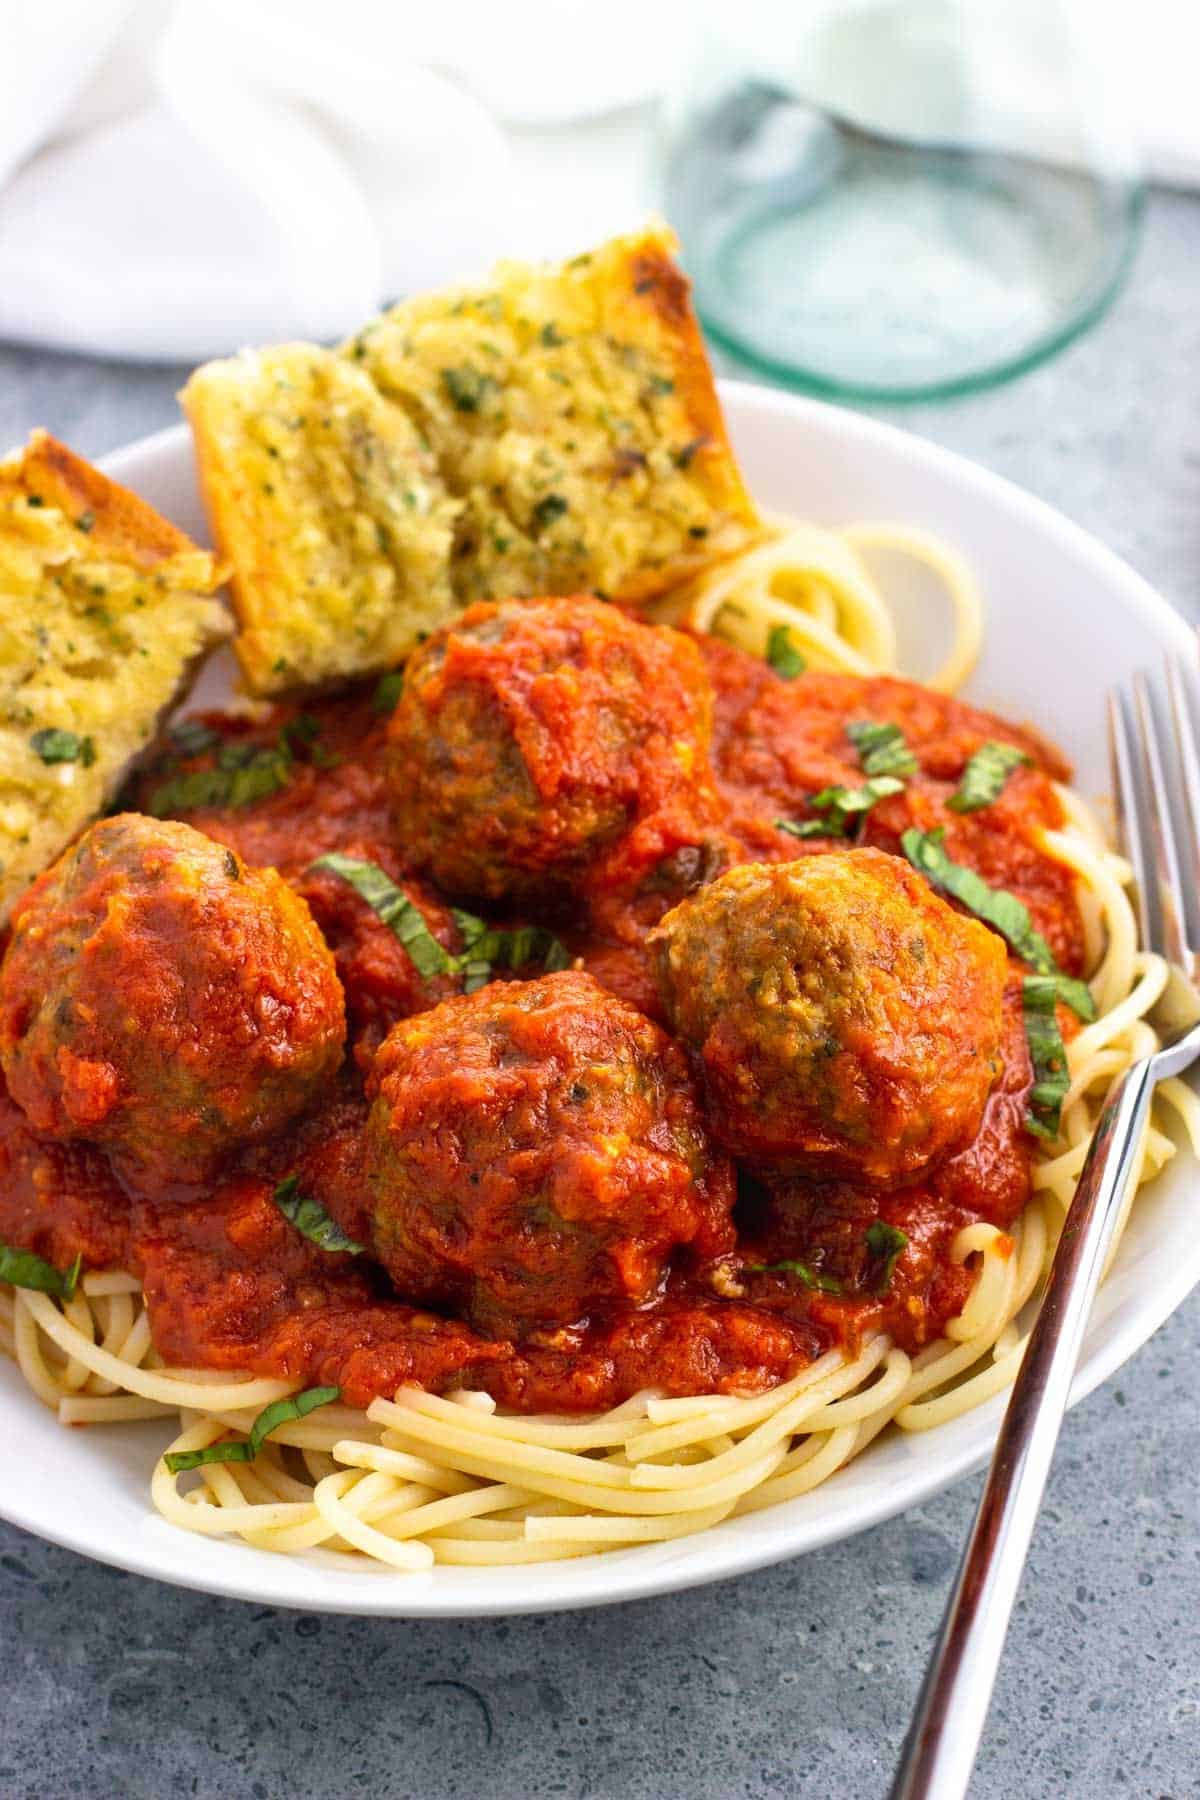 A shallow bowl of spaghetti and sausage meatballs with garlic bread.